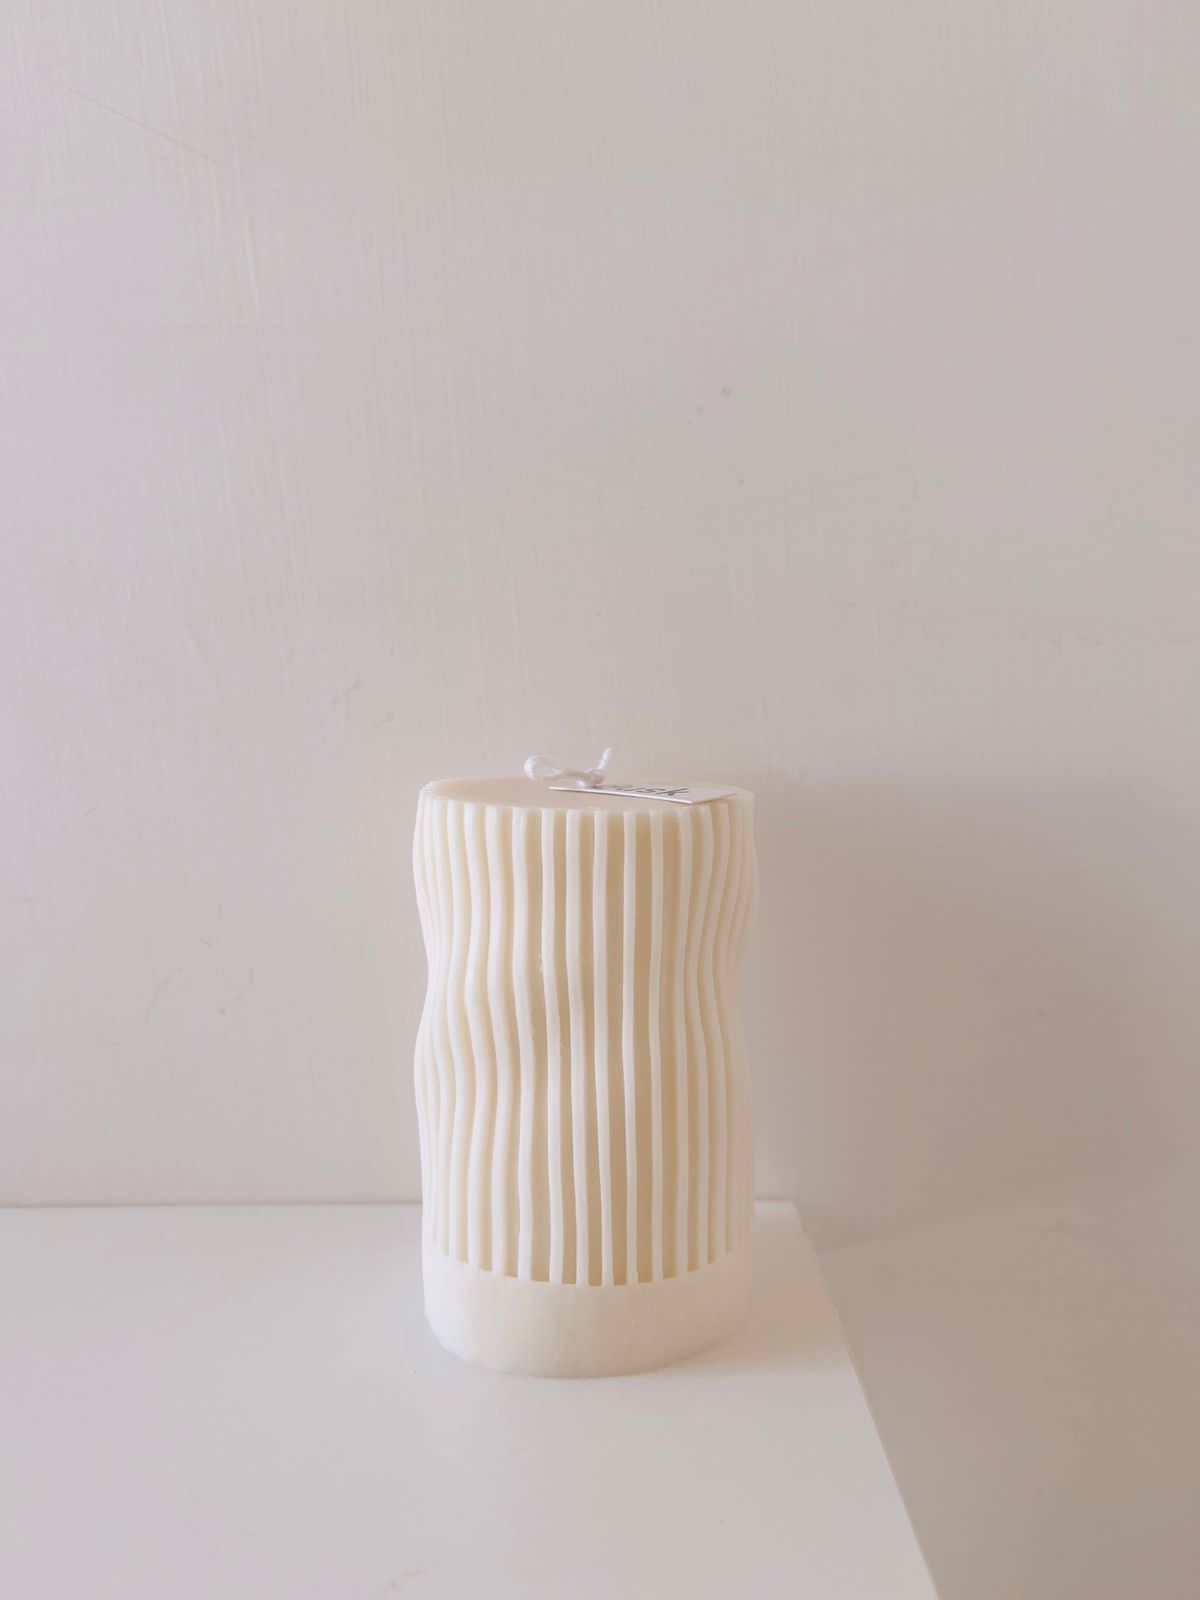 Light up your atmosphere with an eye-catching Wavy Pillar Candle! It adds fun, flair, and plenty of wavy-style ambiance to any room. Get creative with the way you arrange it, and lift the mood! 